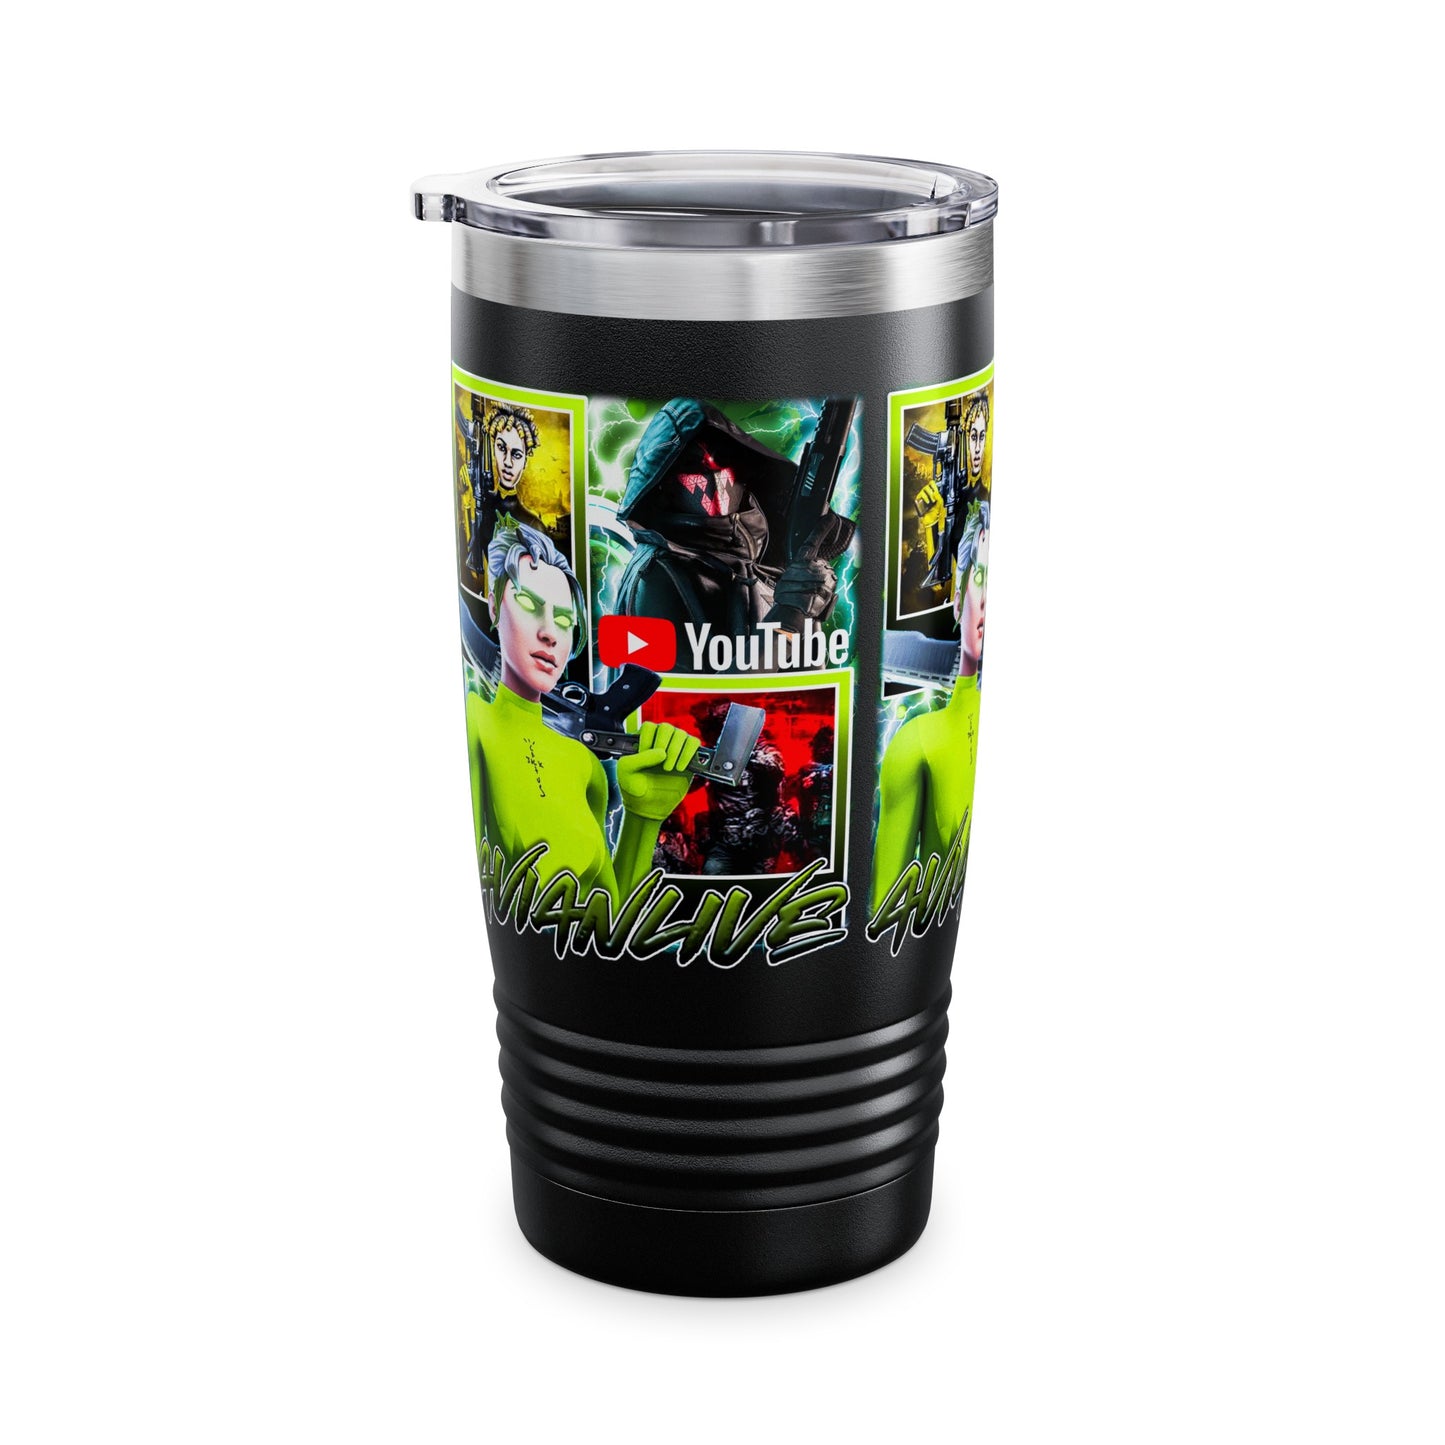 Avianlive Stainless Steal Tumbler